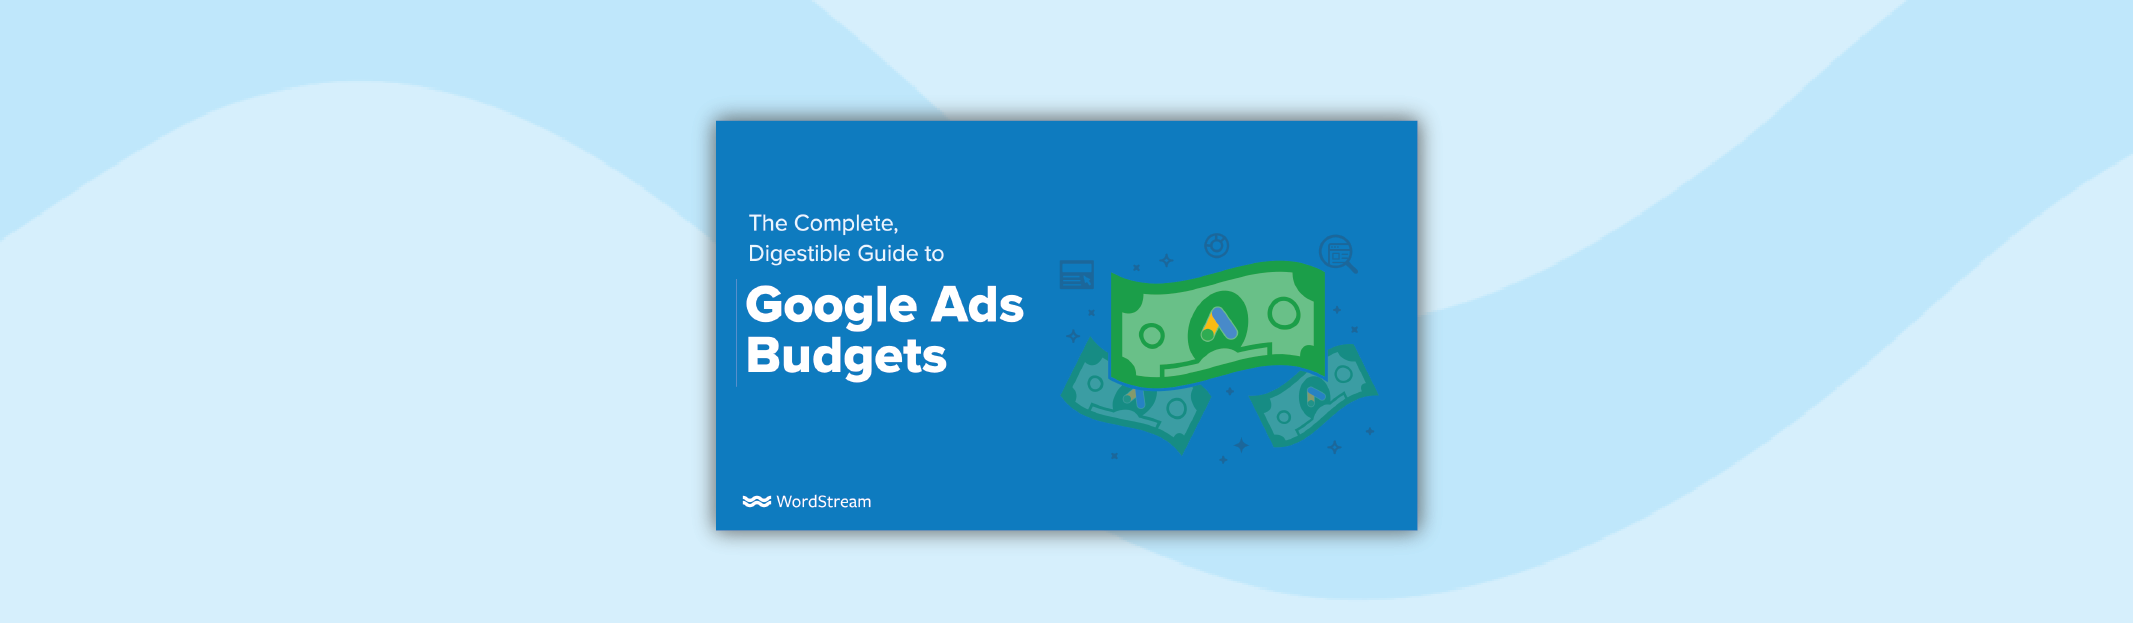 The Complete, Digestible Guide to Google Ads Budgets